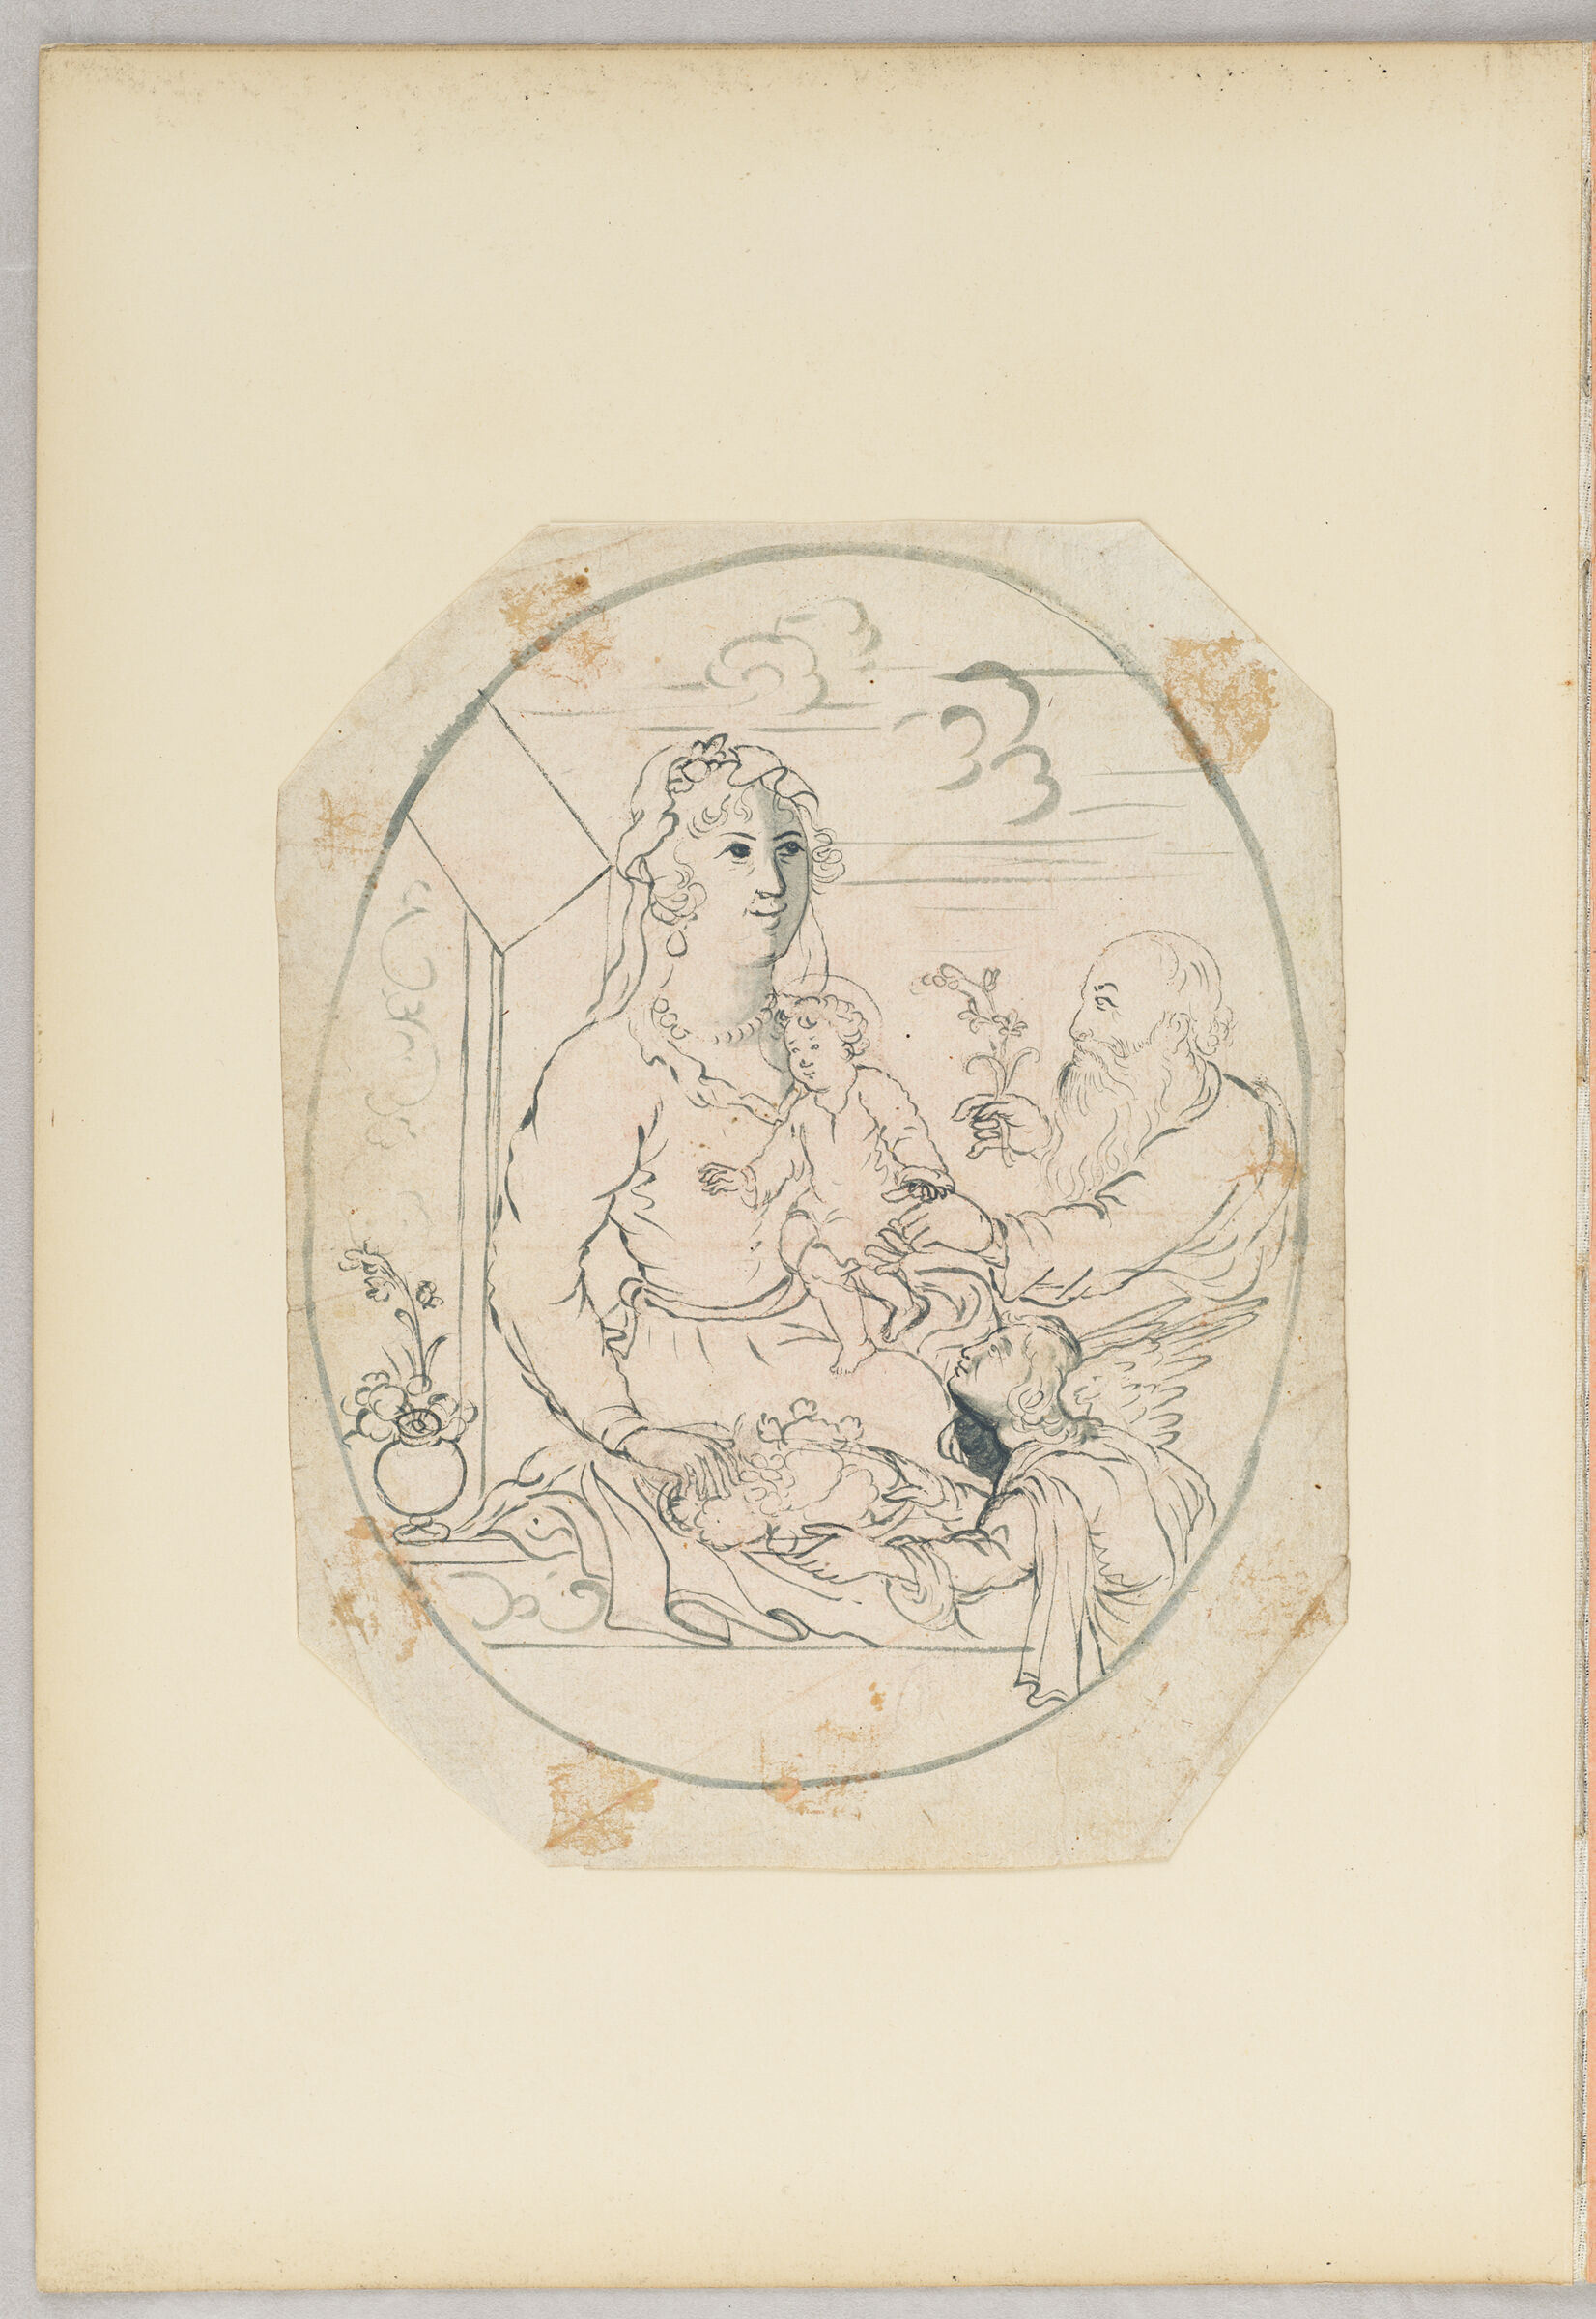 Folio 20 From An Album Of Drawings And Paintings: Holy Family With Winged Angel In Oval Frame (Recto); Three Drawings Of Figures In European Dress (Verso)